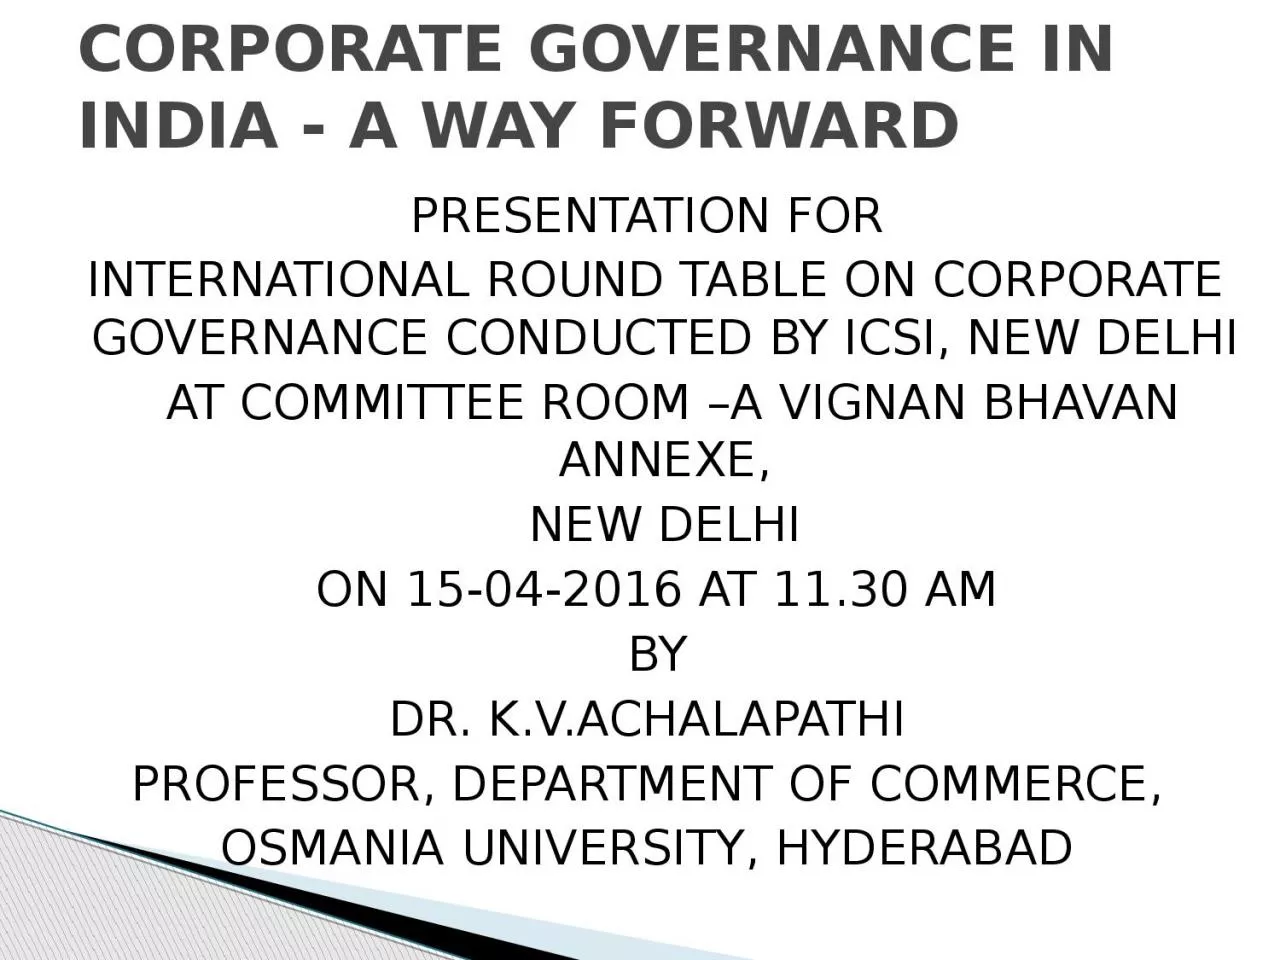 PRESENTATION FOR  INTERNATIONAL ROUND TABLE ON CORPORATE GOVERNANCE CONDUCTED BY ICSI,